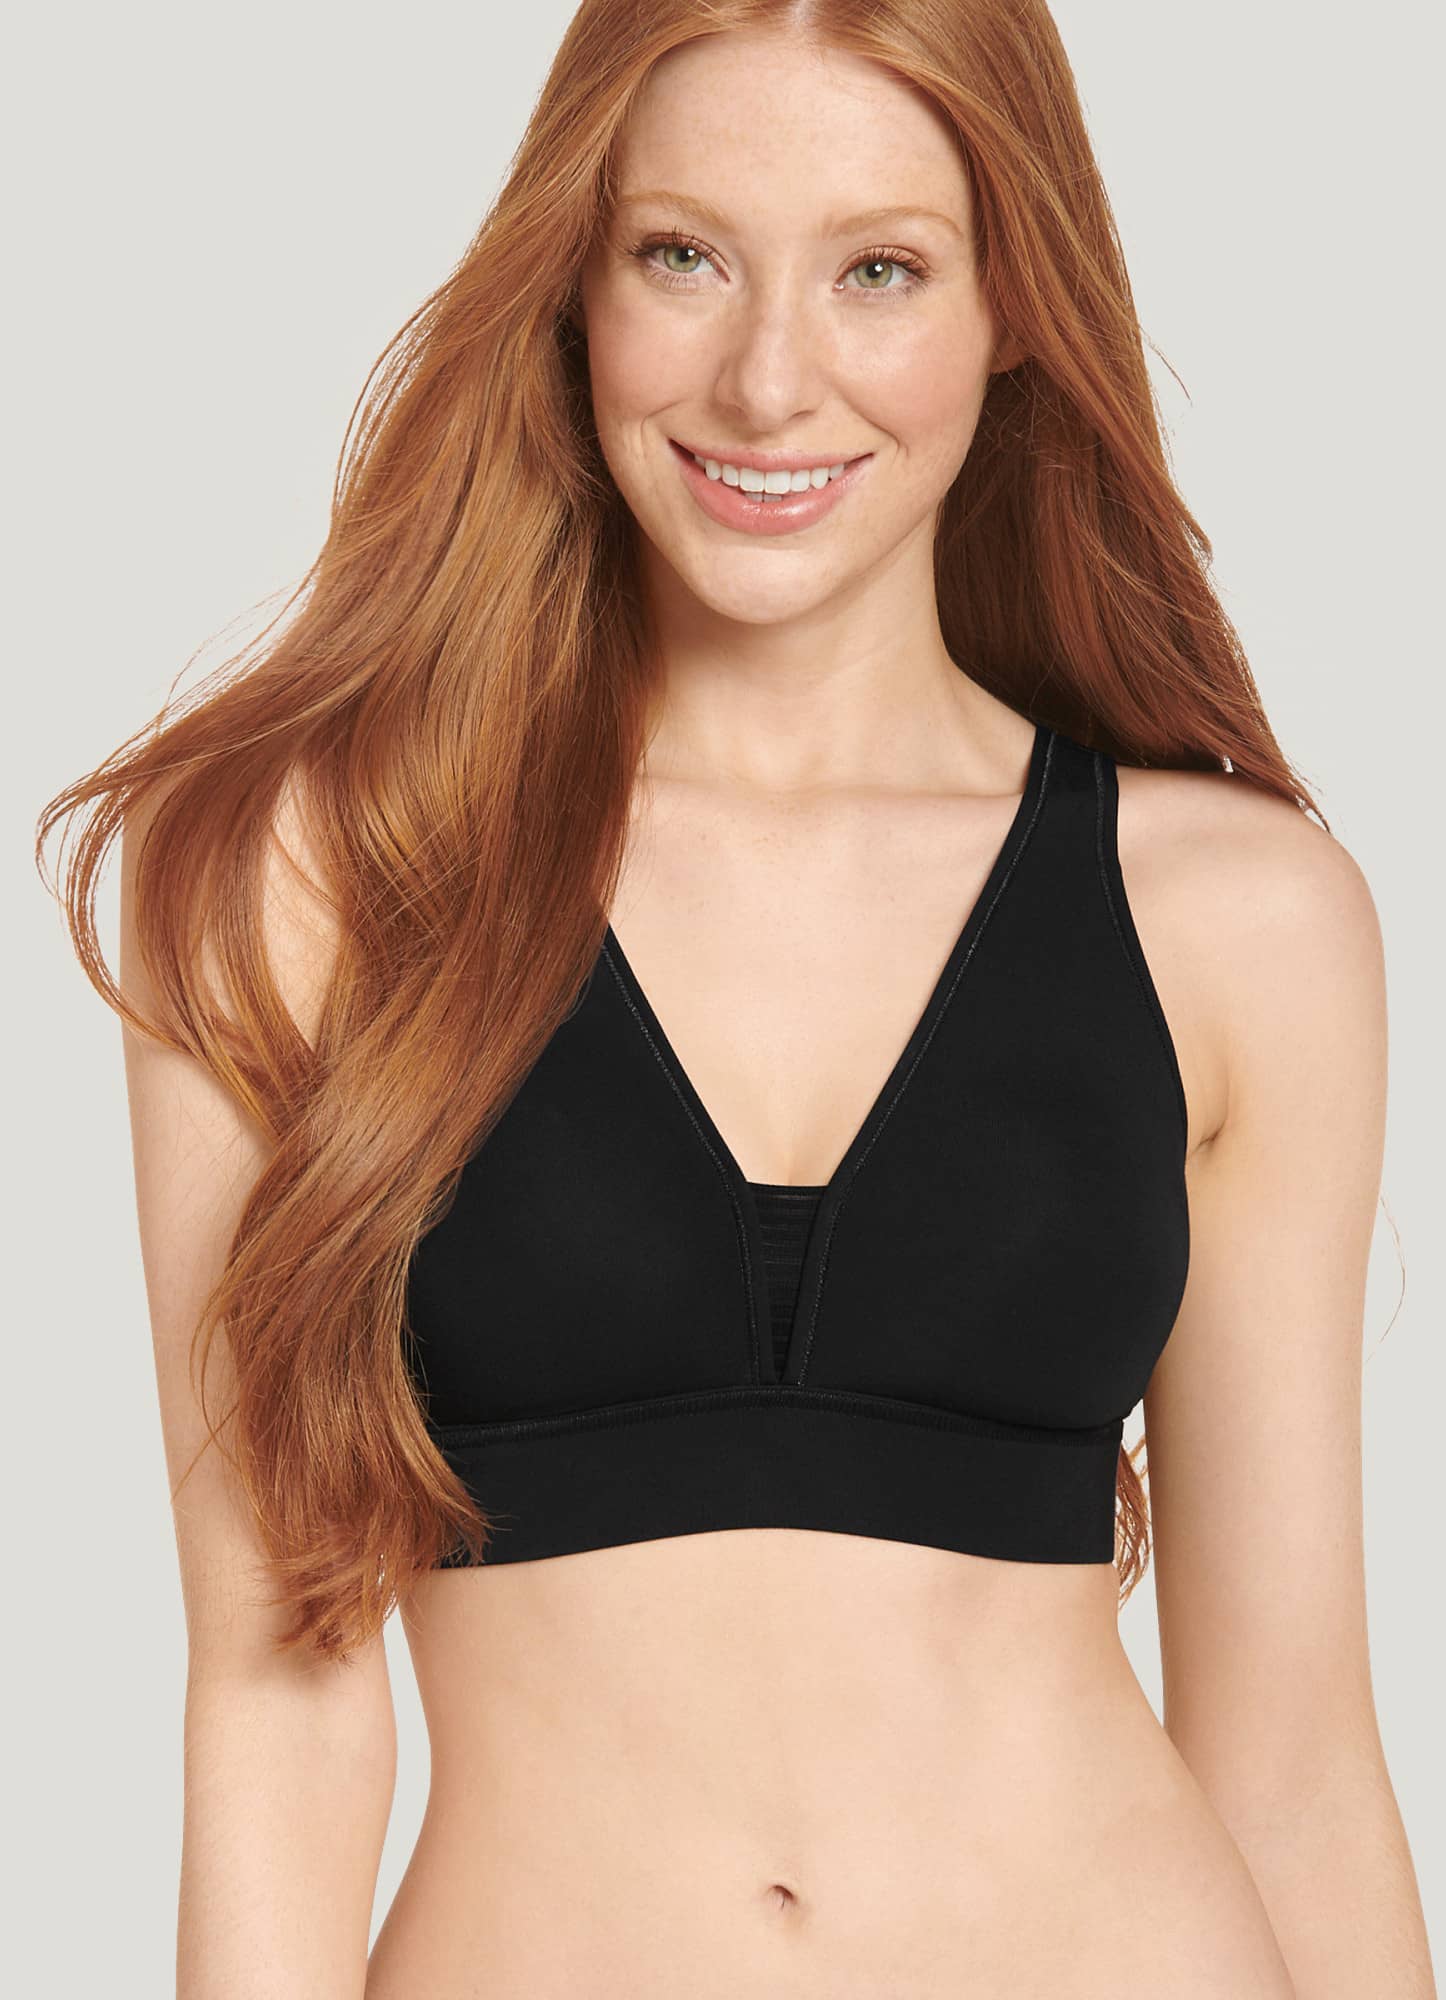 Jockey Women's Bra Forever Fit T-Shirt Molded Cup Lace Bra, Black, L at   Women's Clothing store